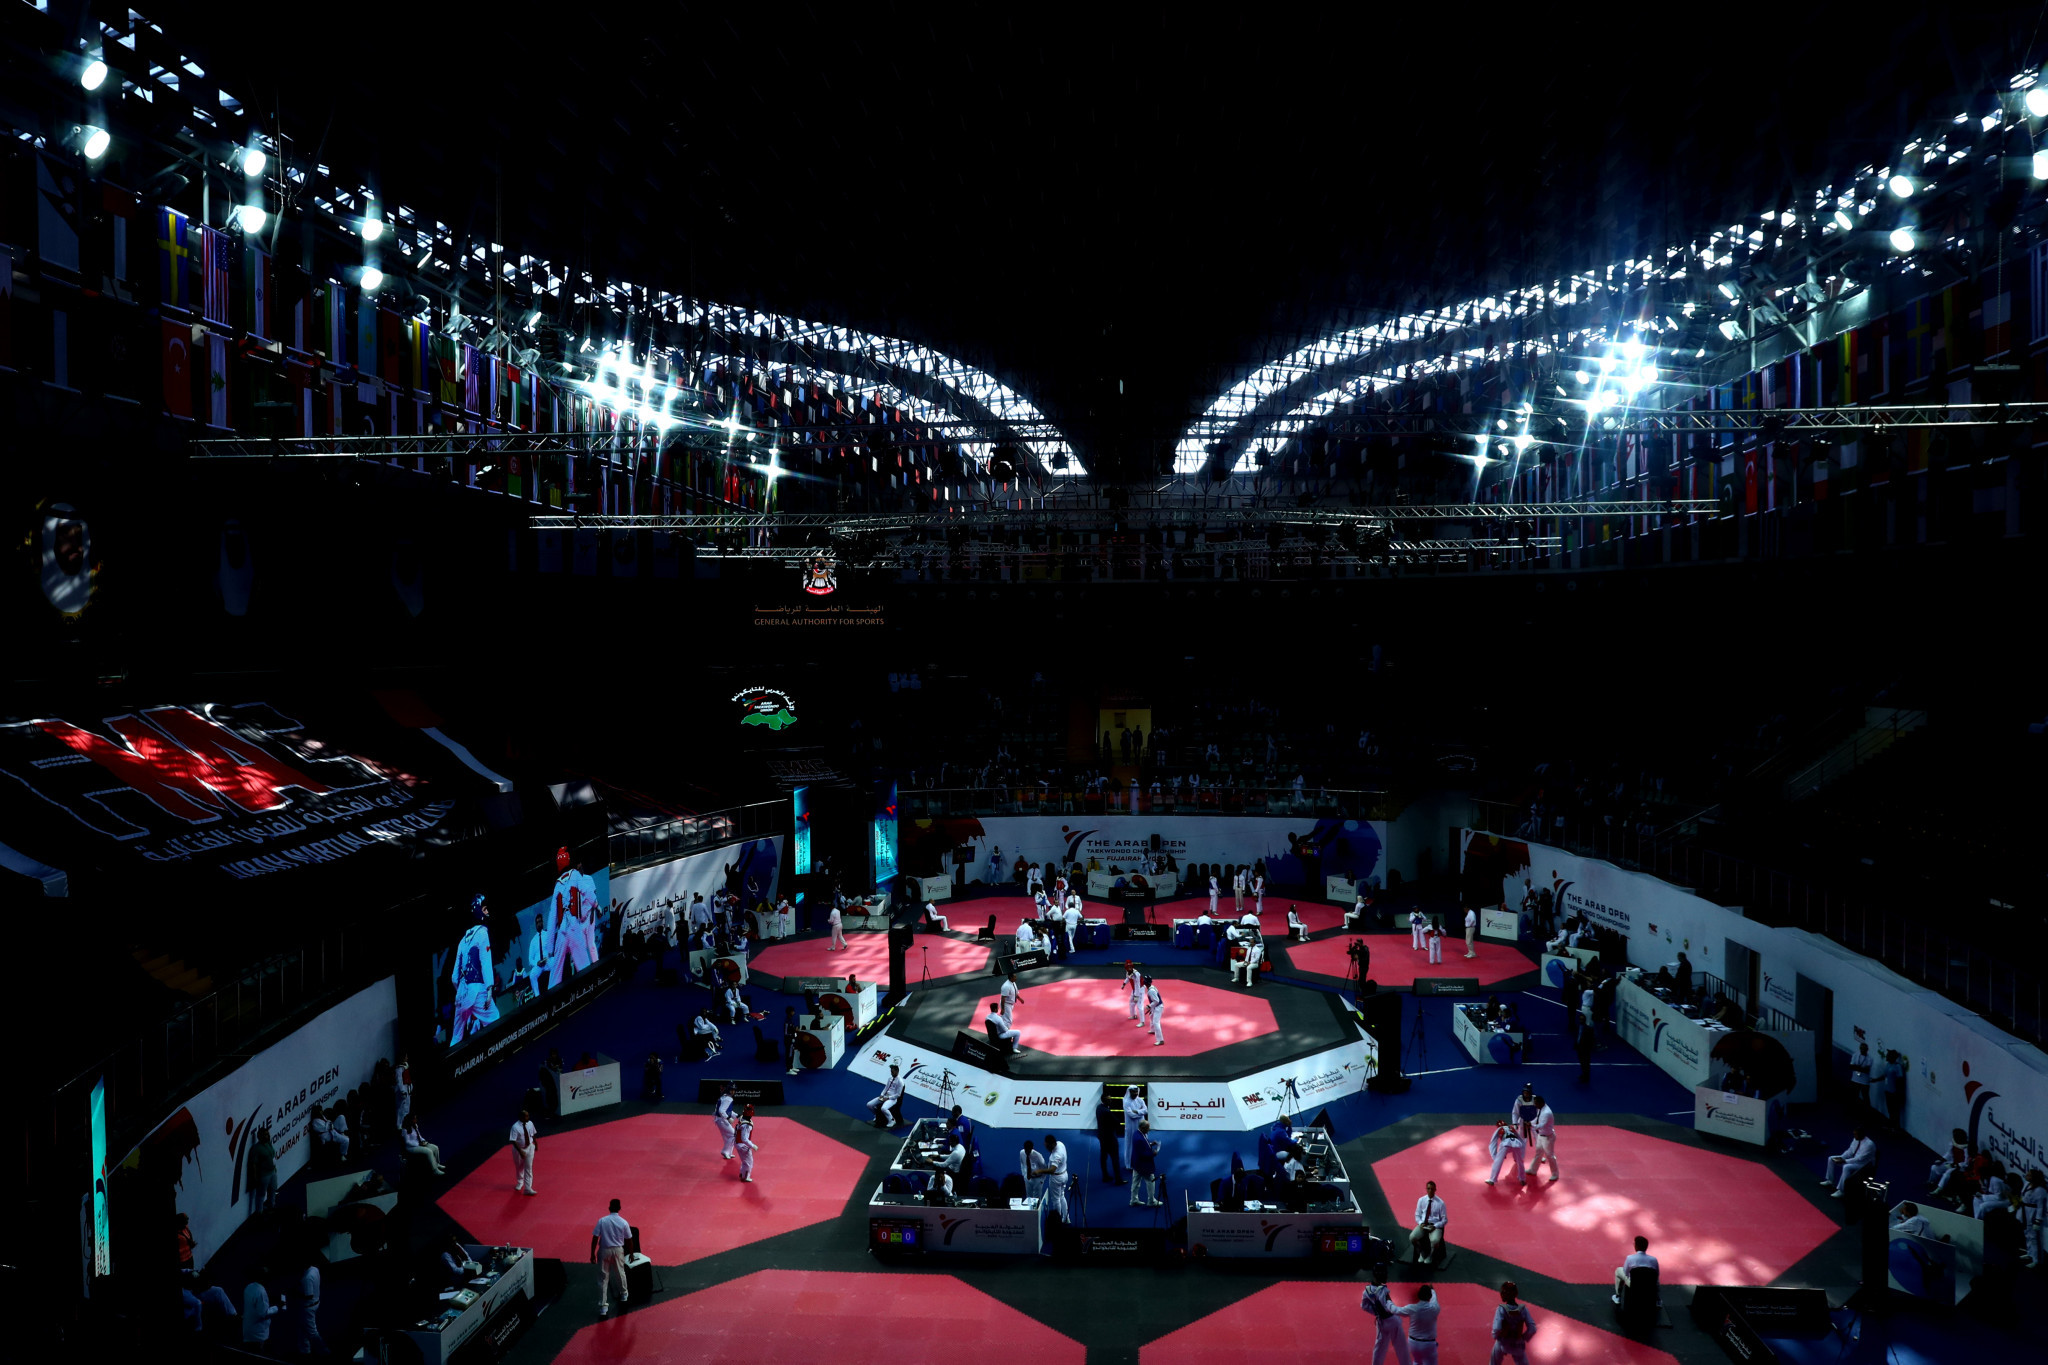 Zayed Sports Complex will now be the location for the first Karate 1-Premier League event of the 2022 season ©Getty Images